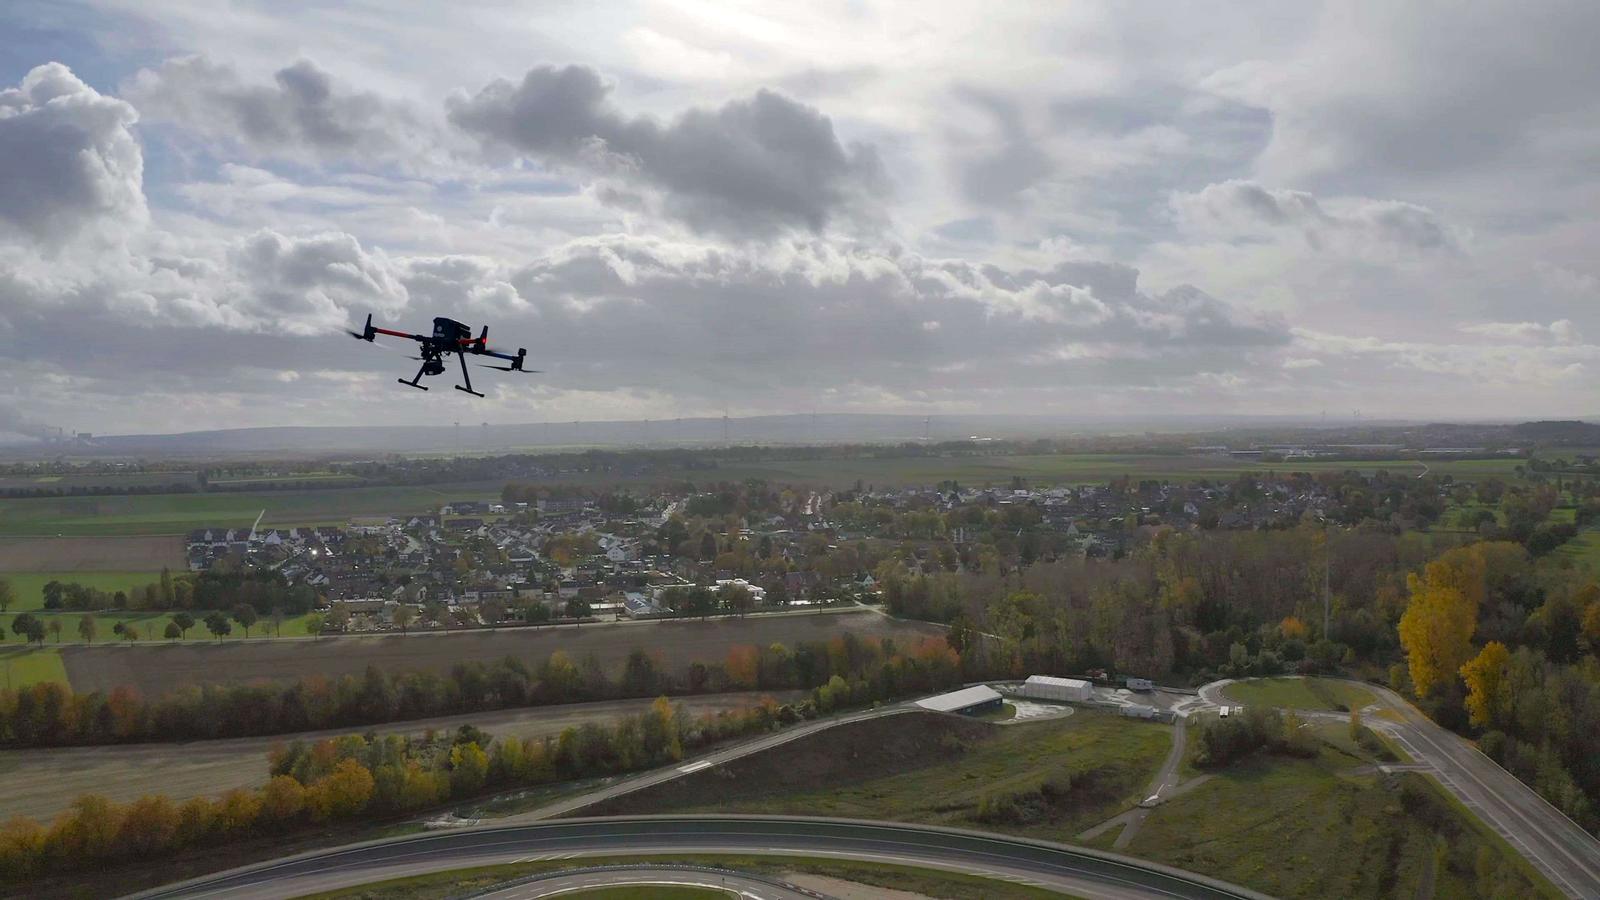 Vodafone network takes to the sky to ensure safe passage for drones